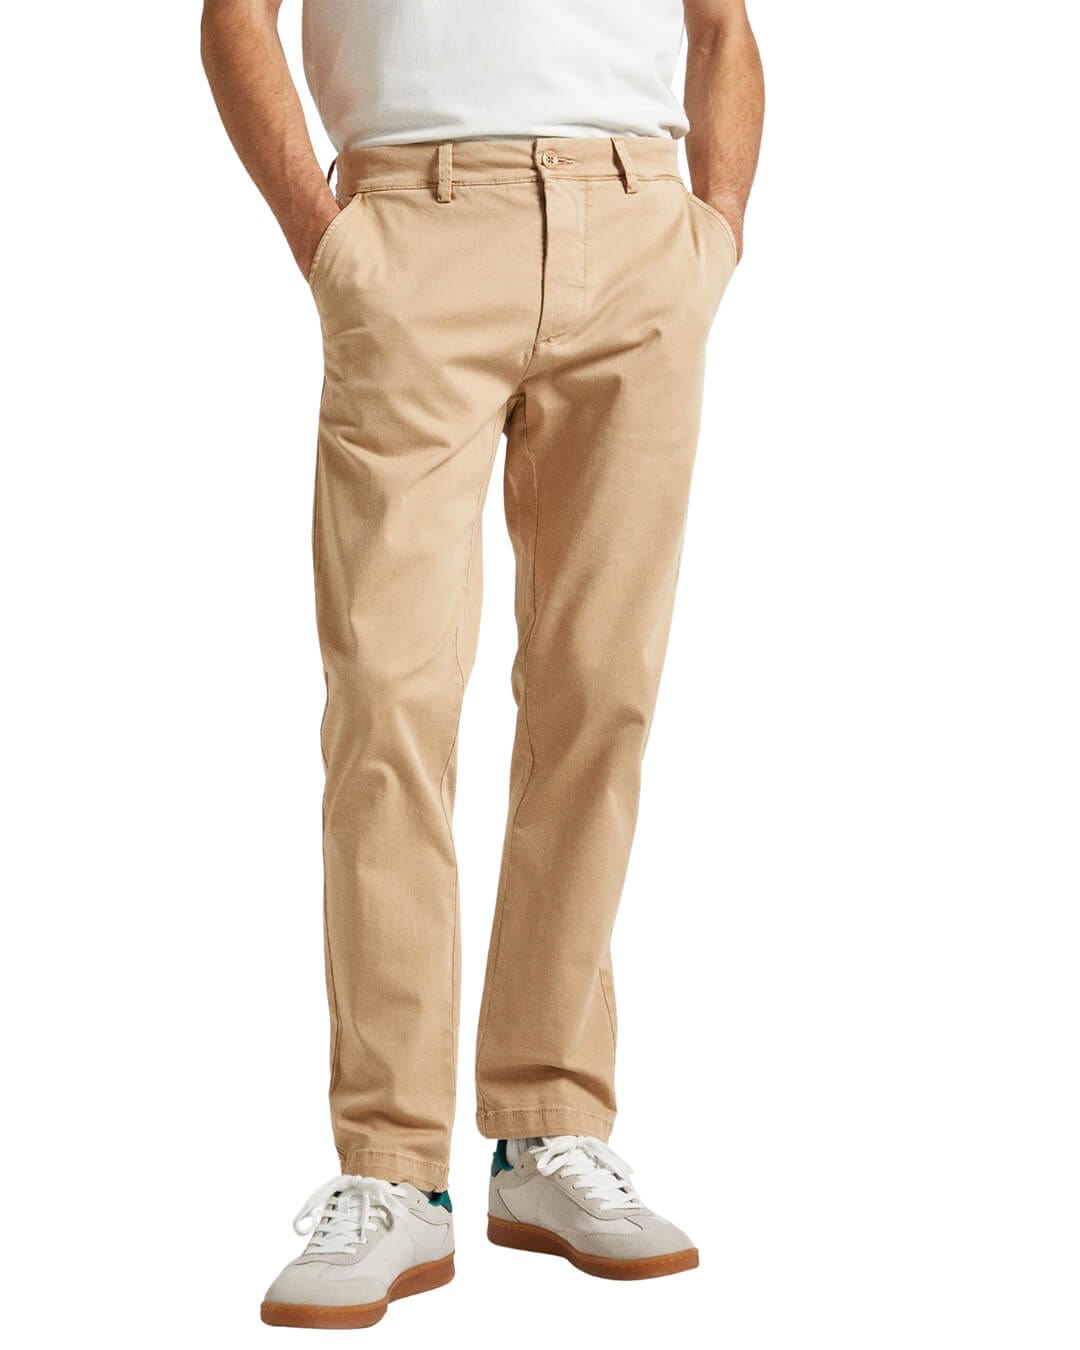 Pepe Jeans Trousers Pepe Jeans Beige Slim Fit Twill Chinos